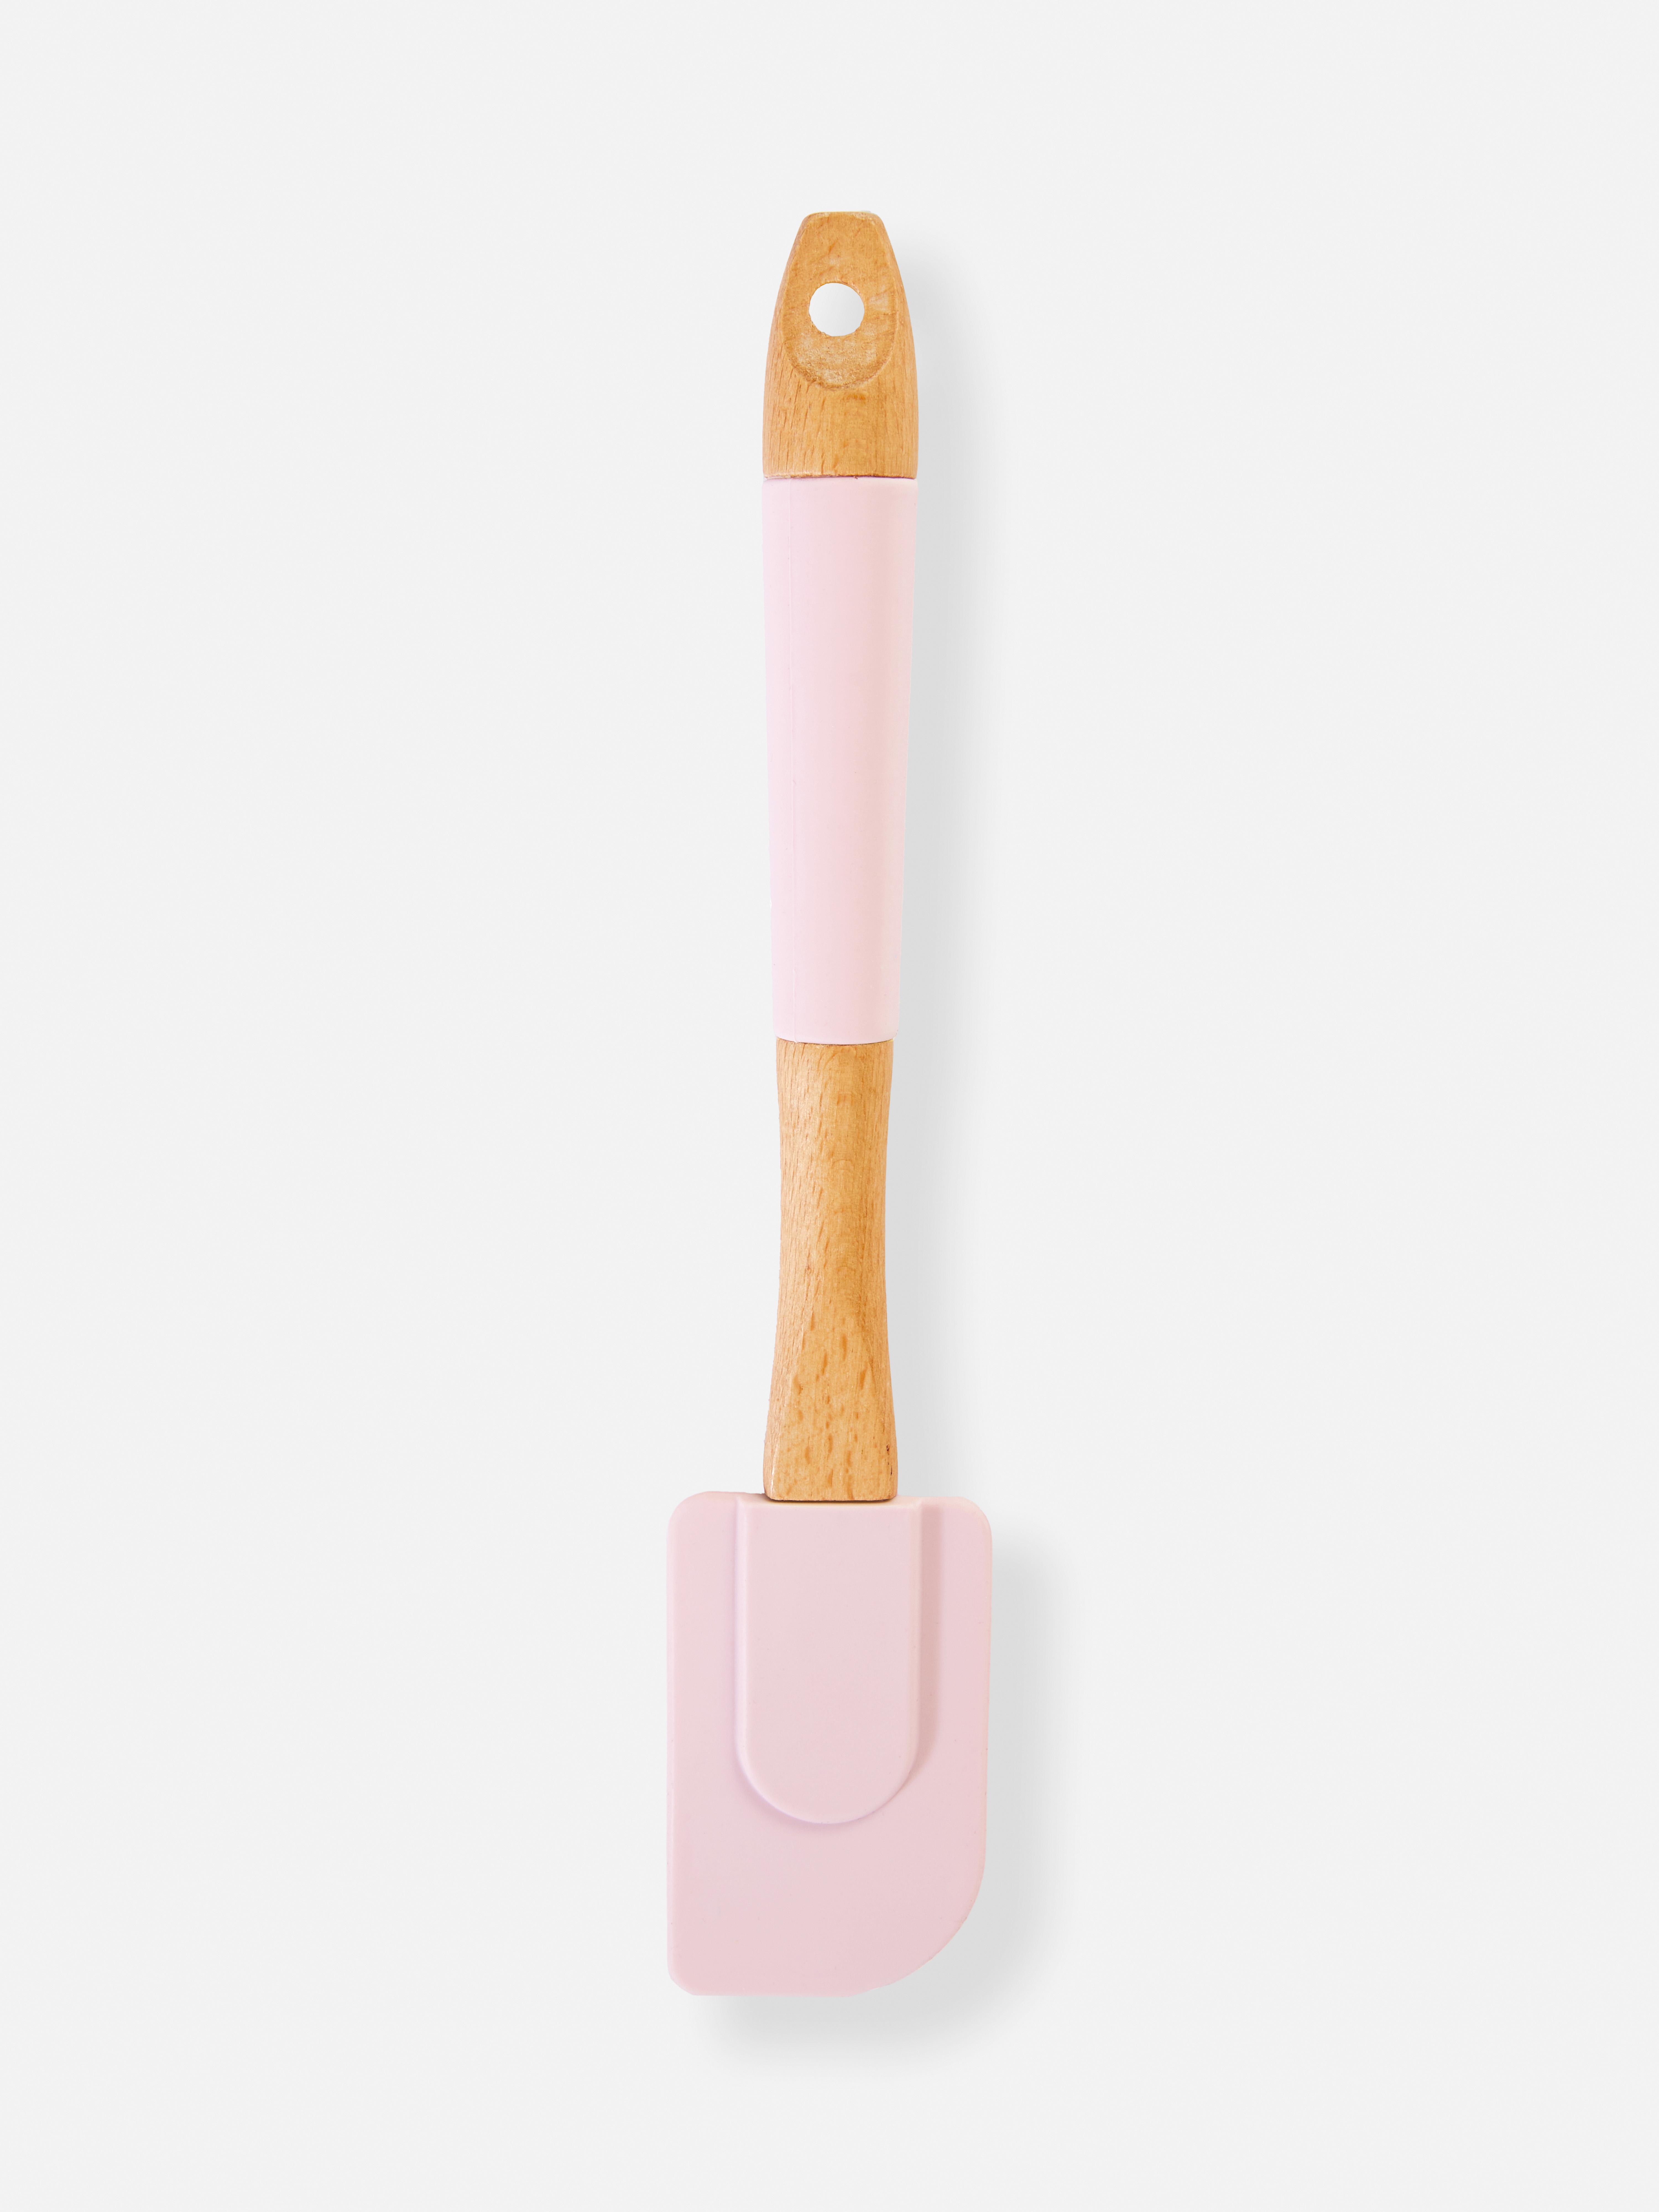 Silicone and Wood Spatula Utensil